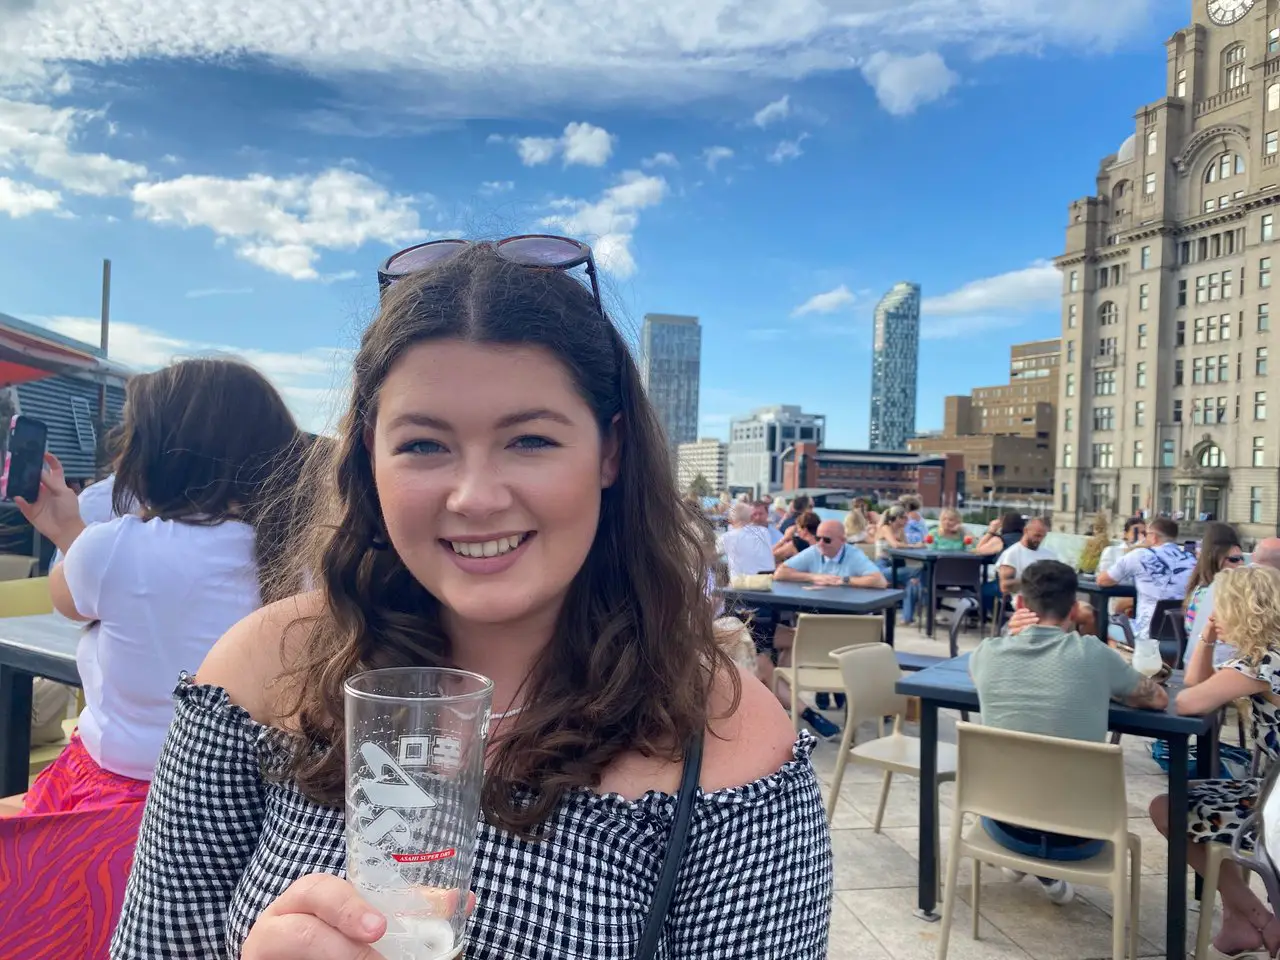 Ella, holding up a pint of beer at a Liverpool rooftop bar. City skyscrapers are in the background. Liverpool is one of the most affordable cities in the UK!